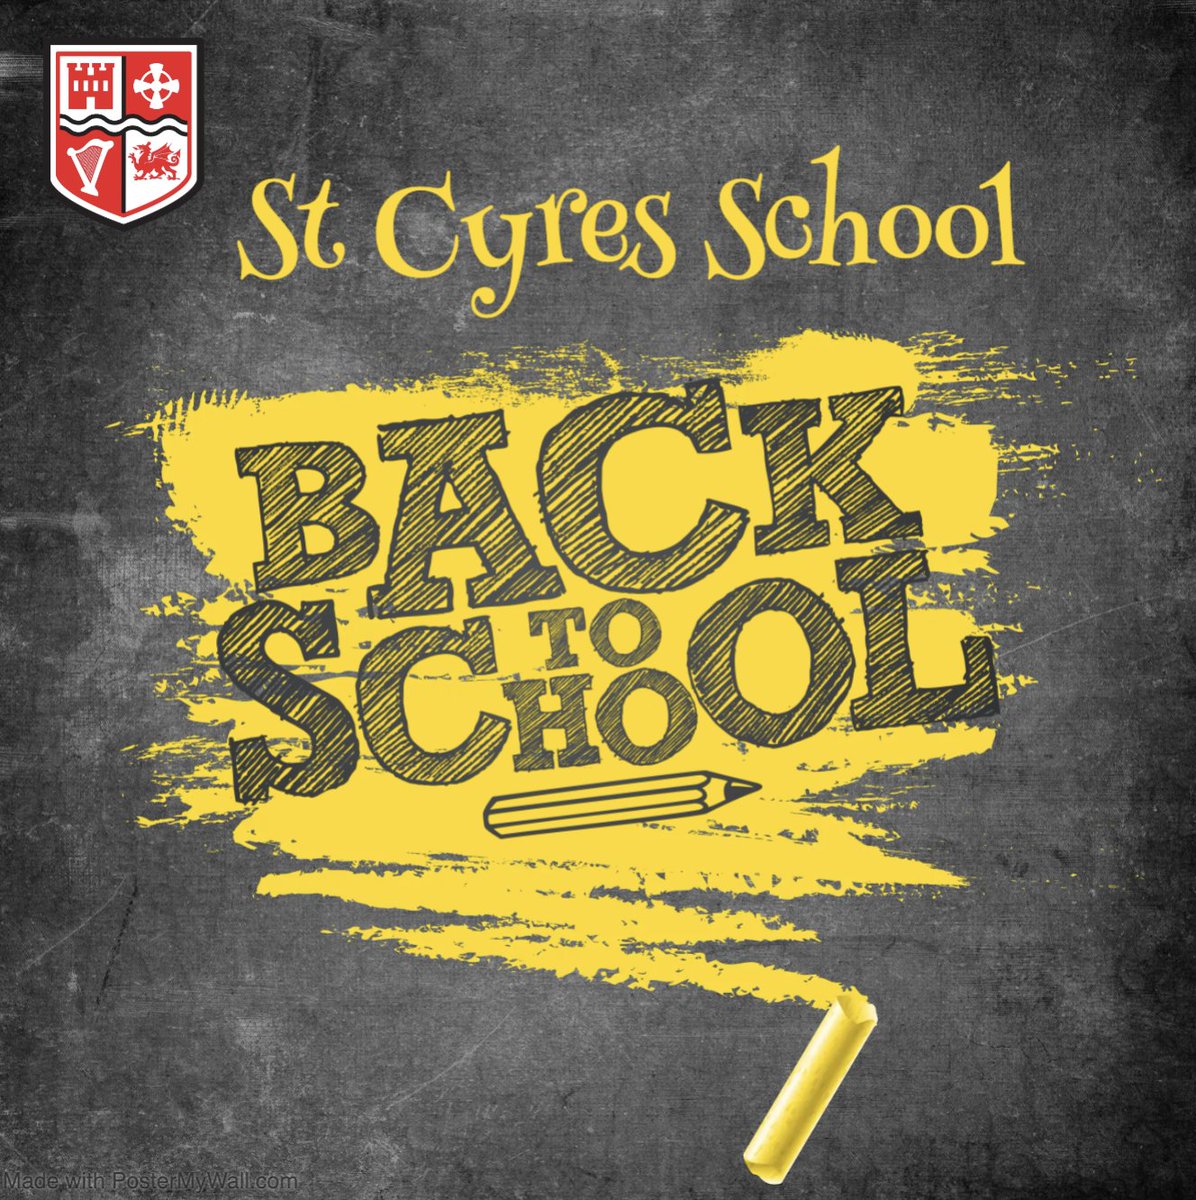 It's nearly that time again! St Cyres staff are looking forward to welcoming all our pupils back this week. We will be welcoming our new Year 7 pupils on Wednesday. Reminders of start times and dates to follow shortly. @StCyresSchool @CyresTransition